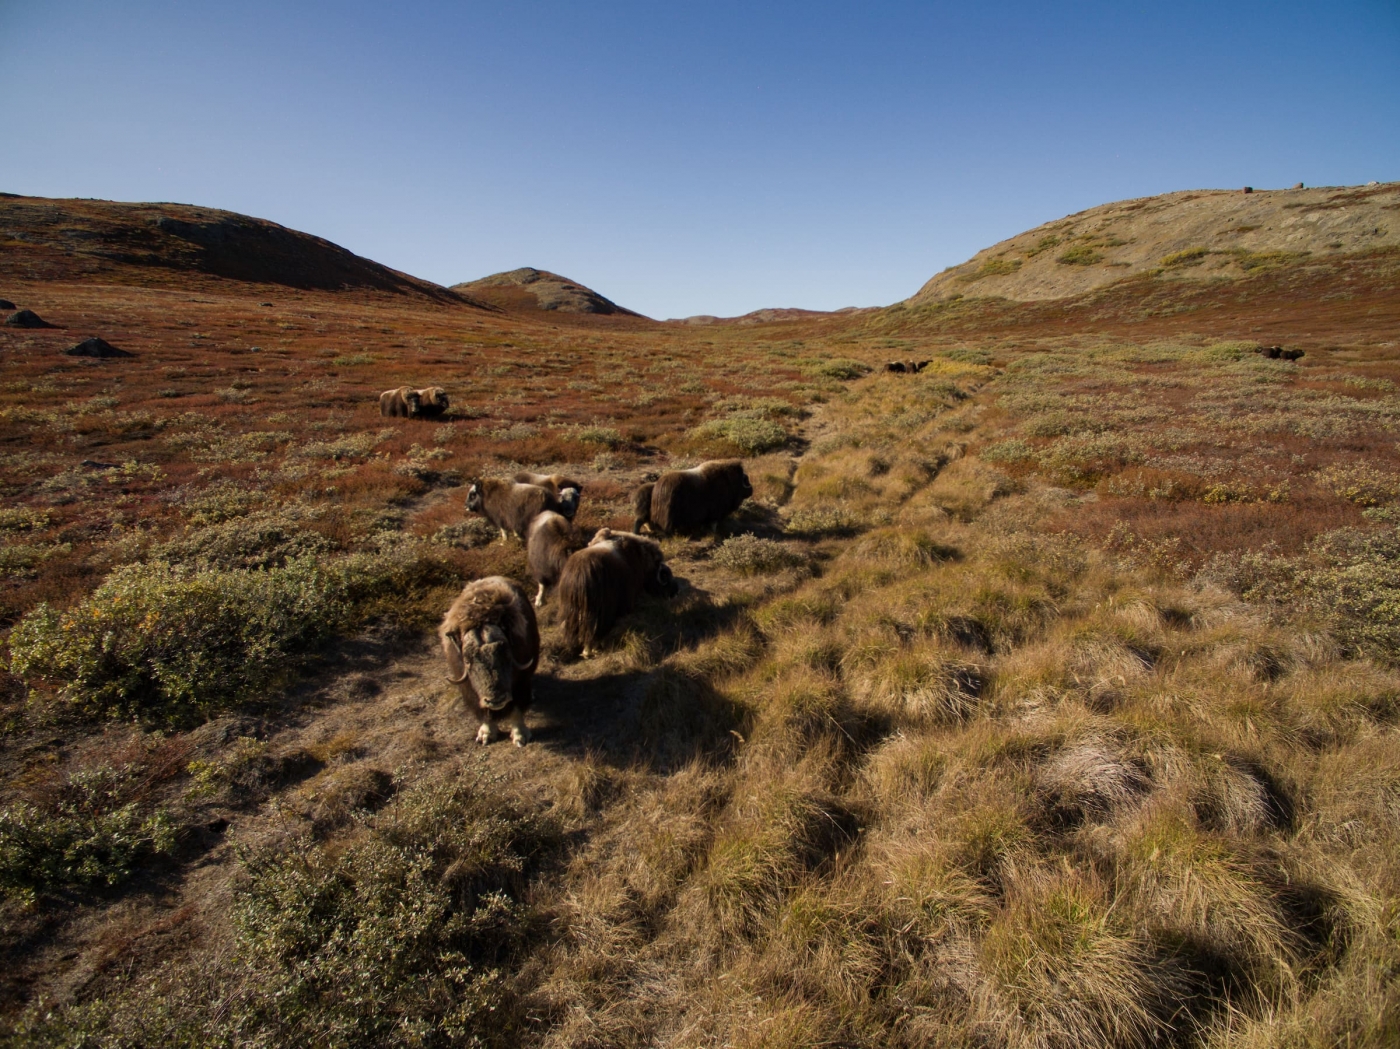 Muskoxen in the backcountry. Photo by Aningaaq R Carlsen